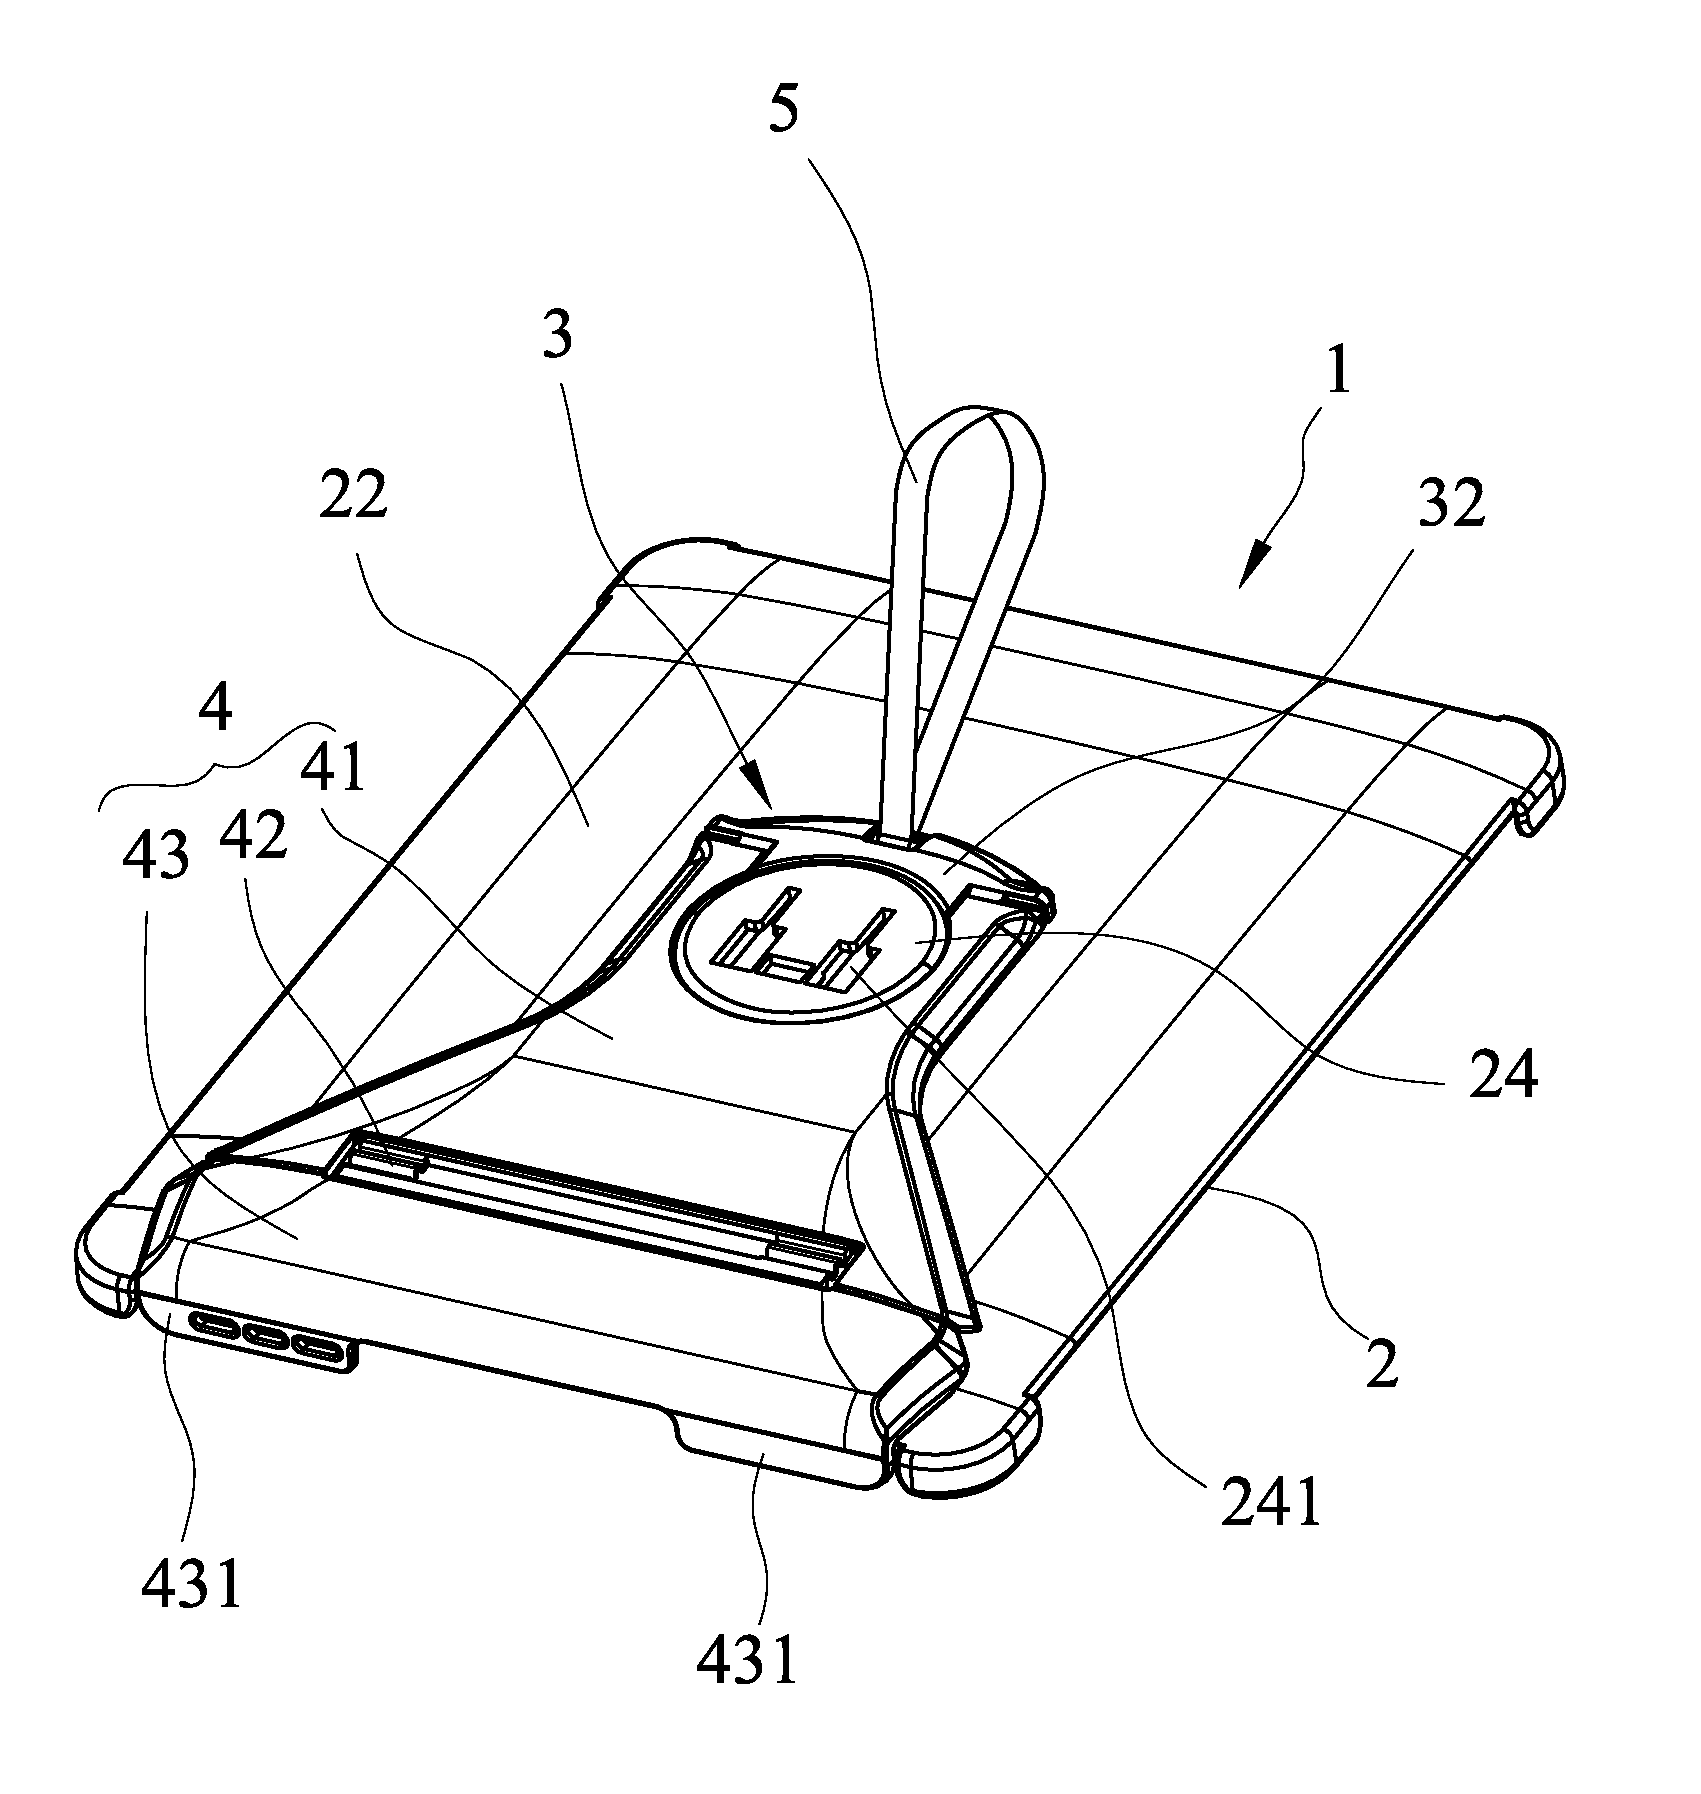 Auxiliary fastening apparatus